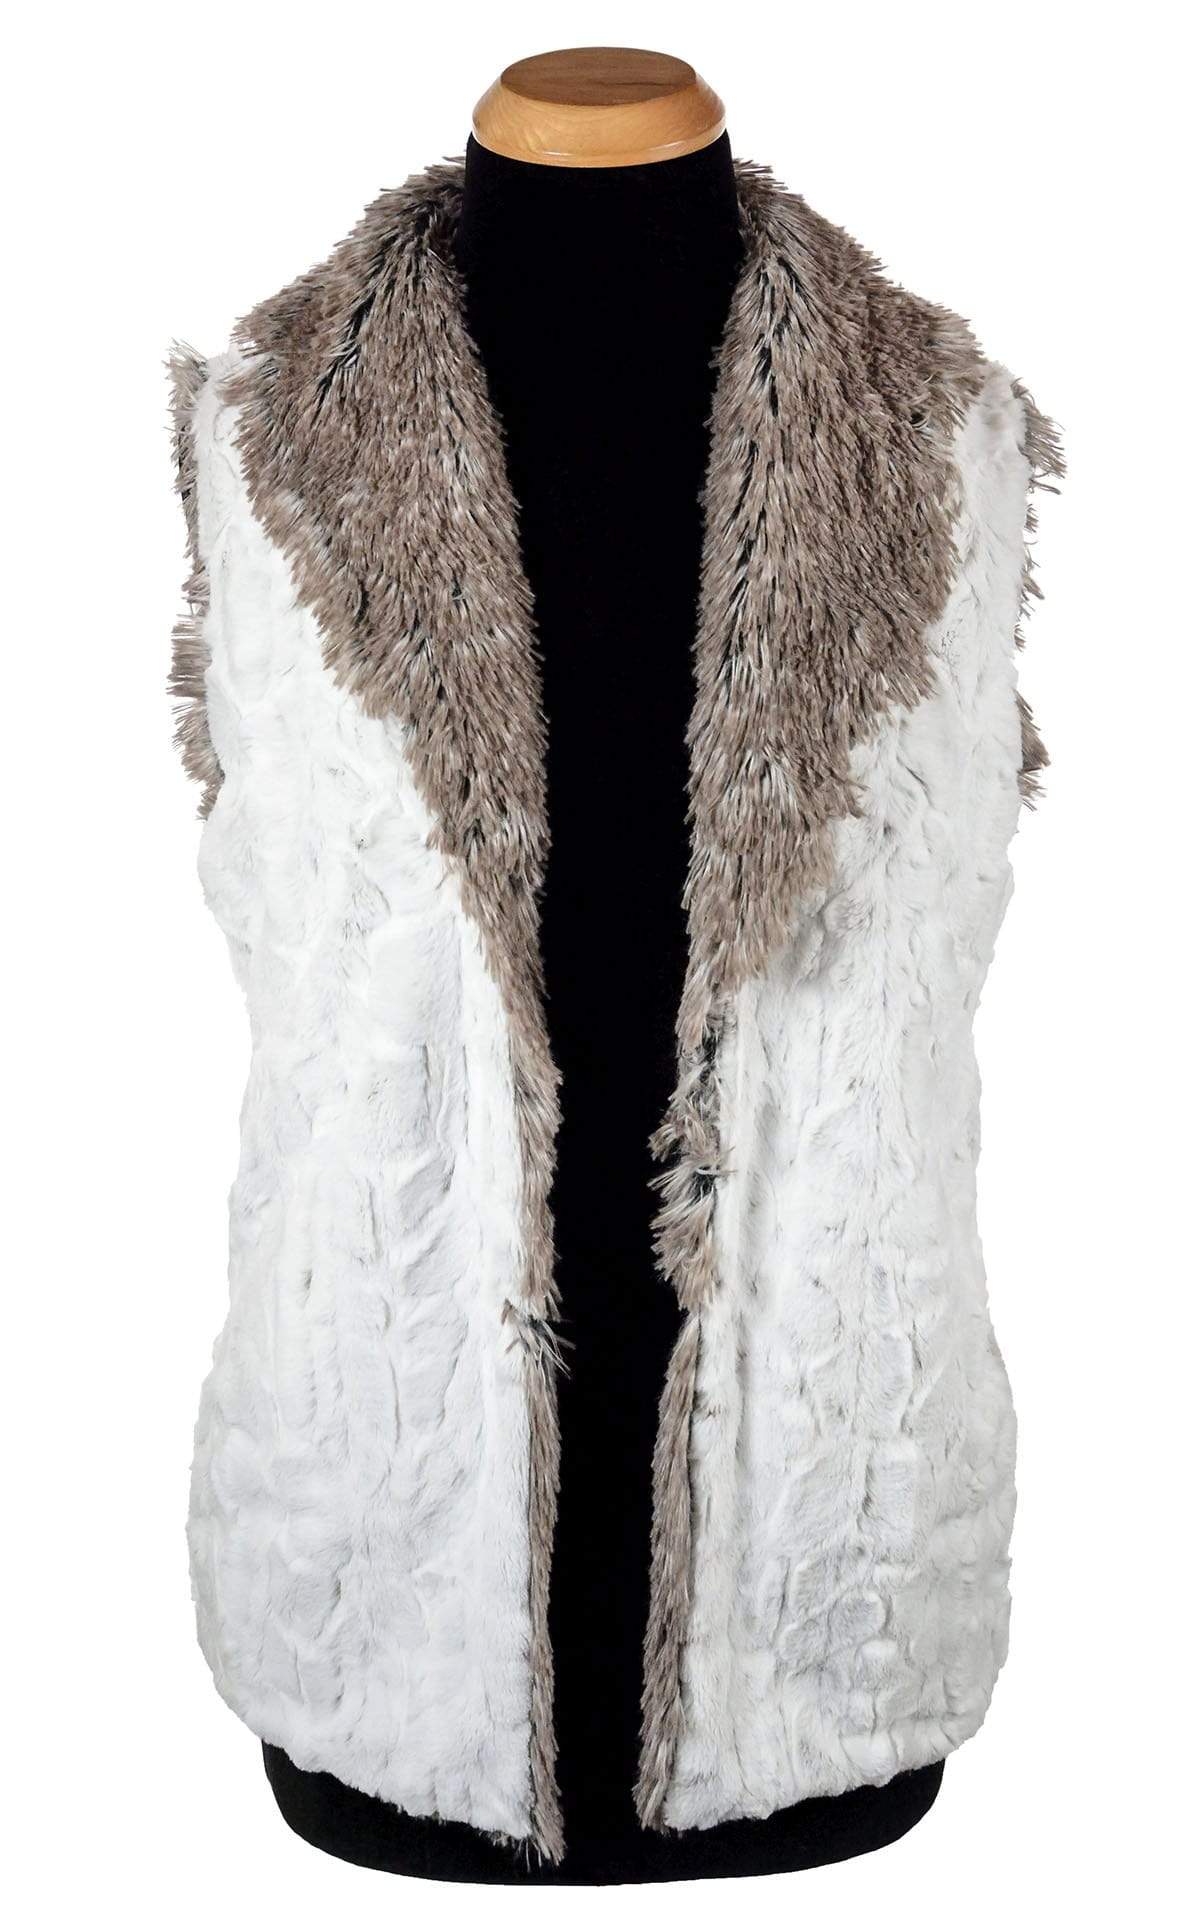  Shawl Collar Vest | Winter Frost Faux Fur with Arctic Fox | By Pandemonium Millinery | Seattle WA US